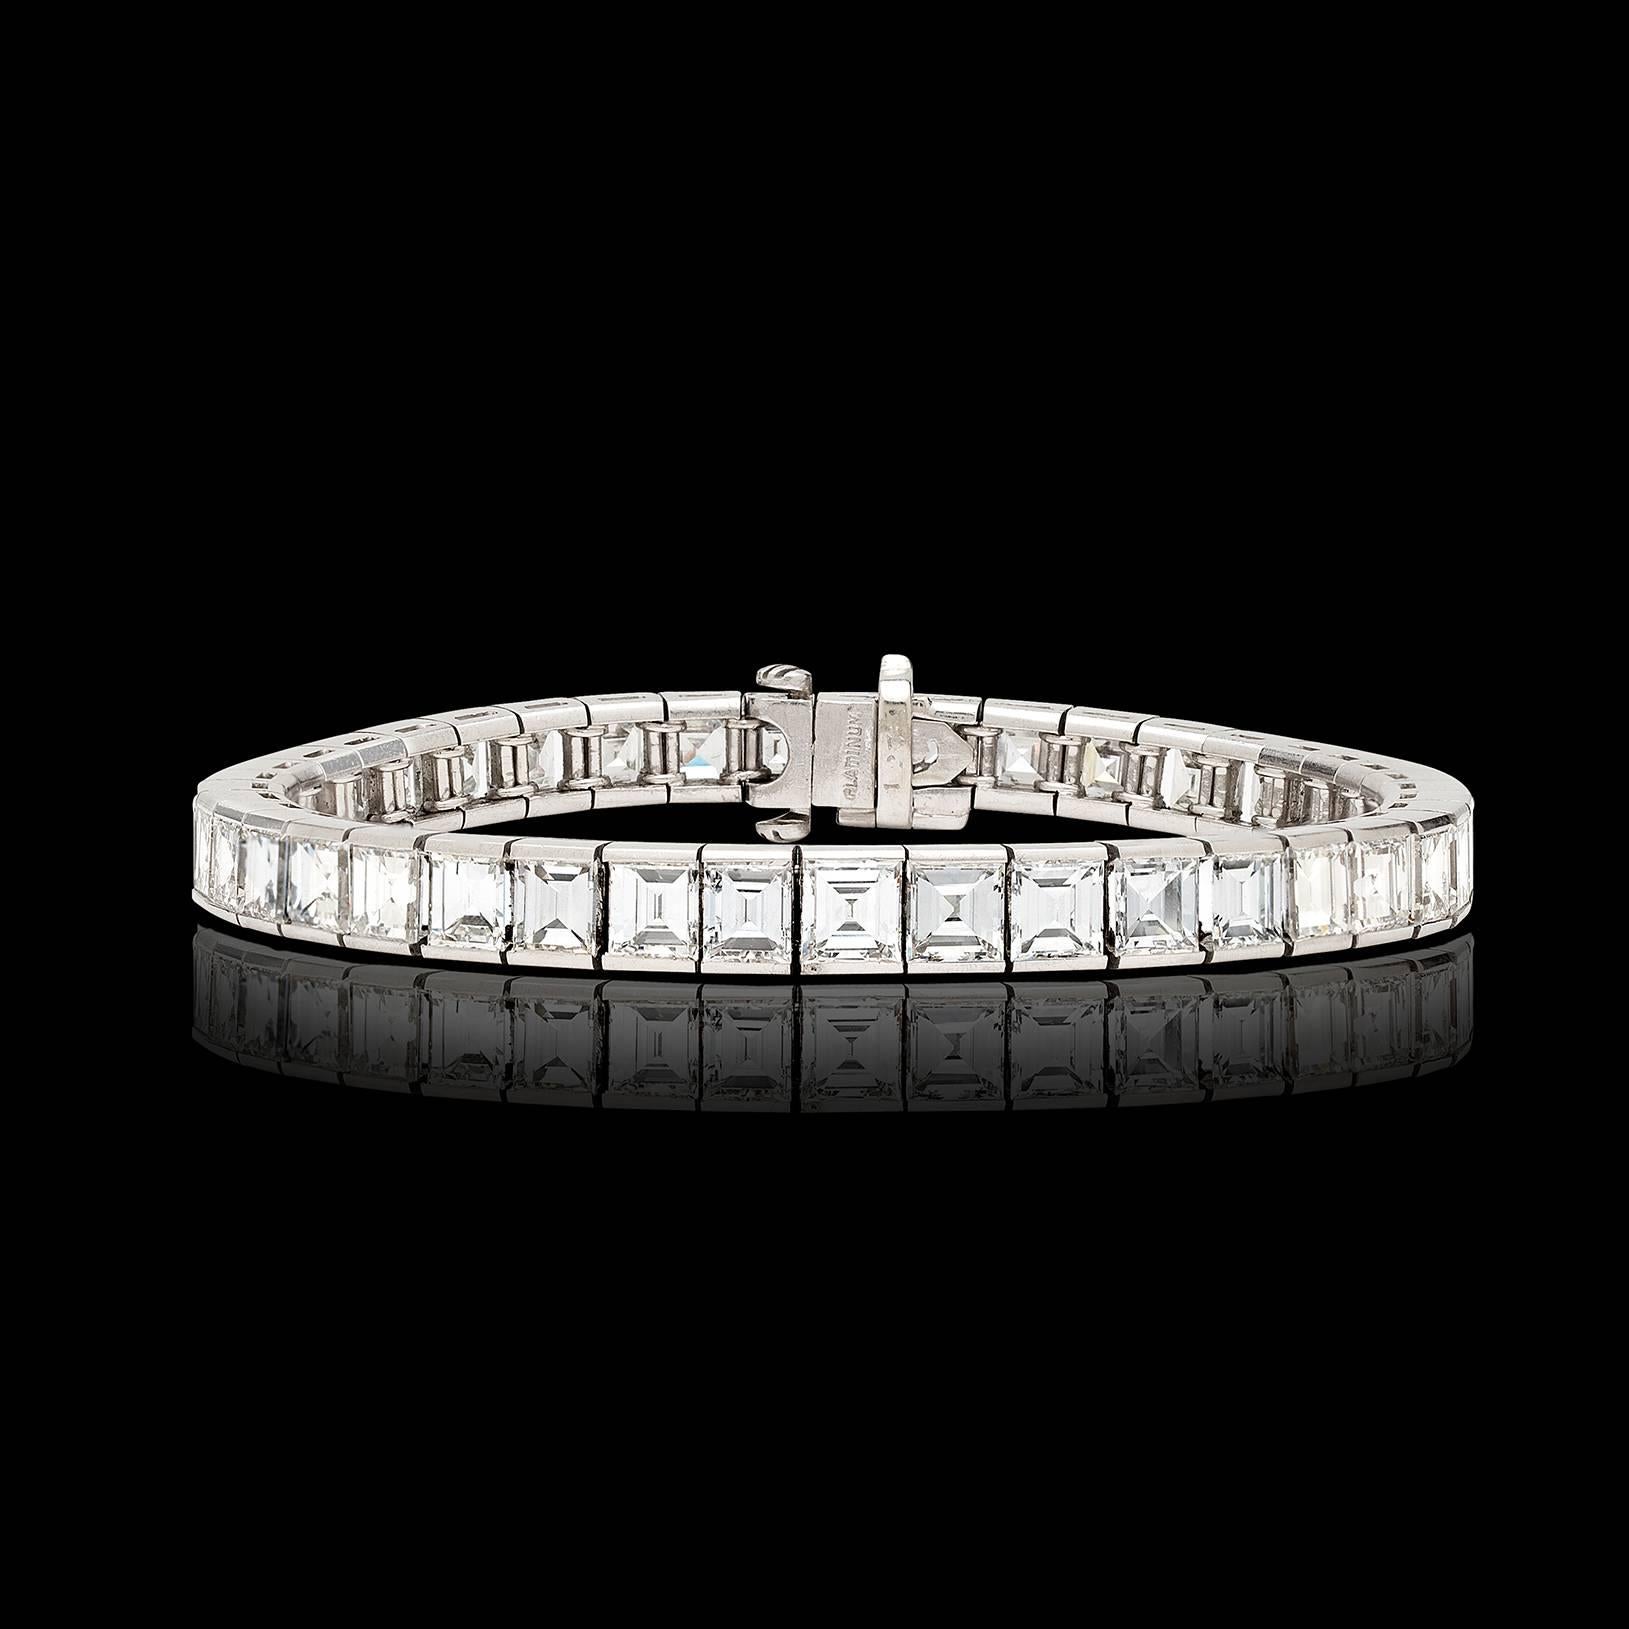 41 gorgeous emerald cut diamonds, weighing in total approximately 20.50 carats, make up this elegant platinum line bracelet. This classic stunner measures 7 inches in length and weighs 40.9 grams. This exceptional take on an enduring design is a